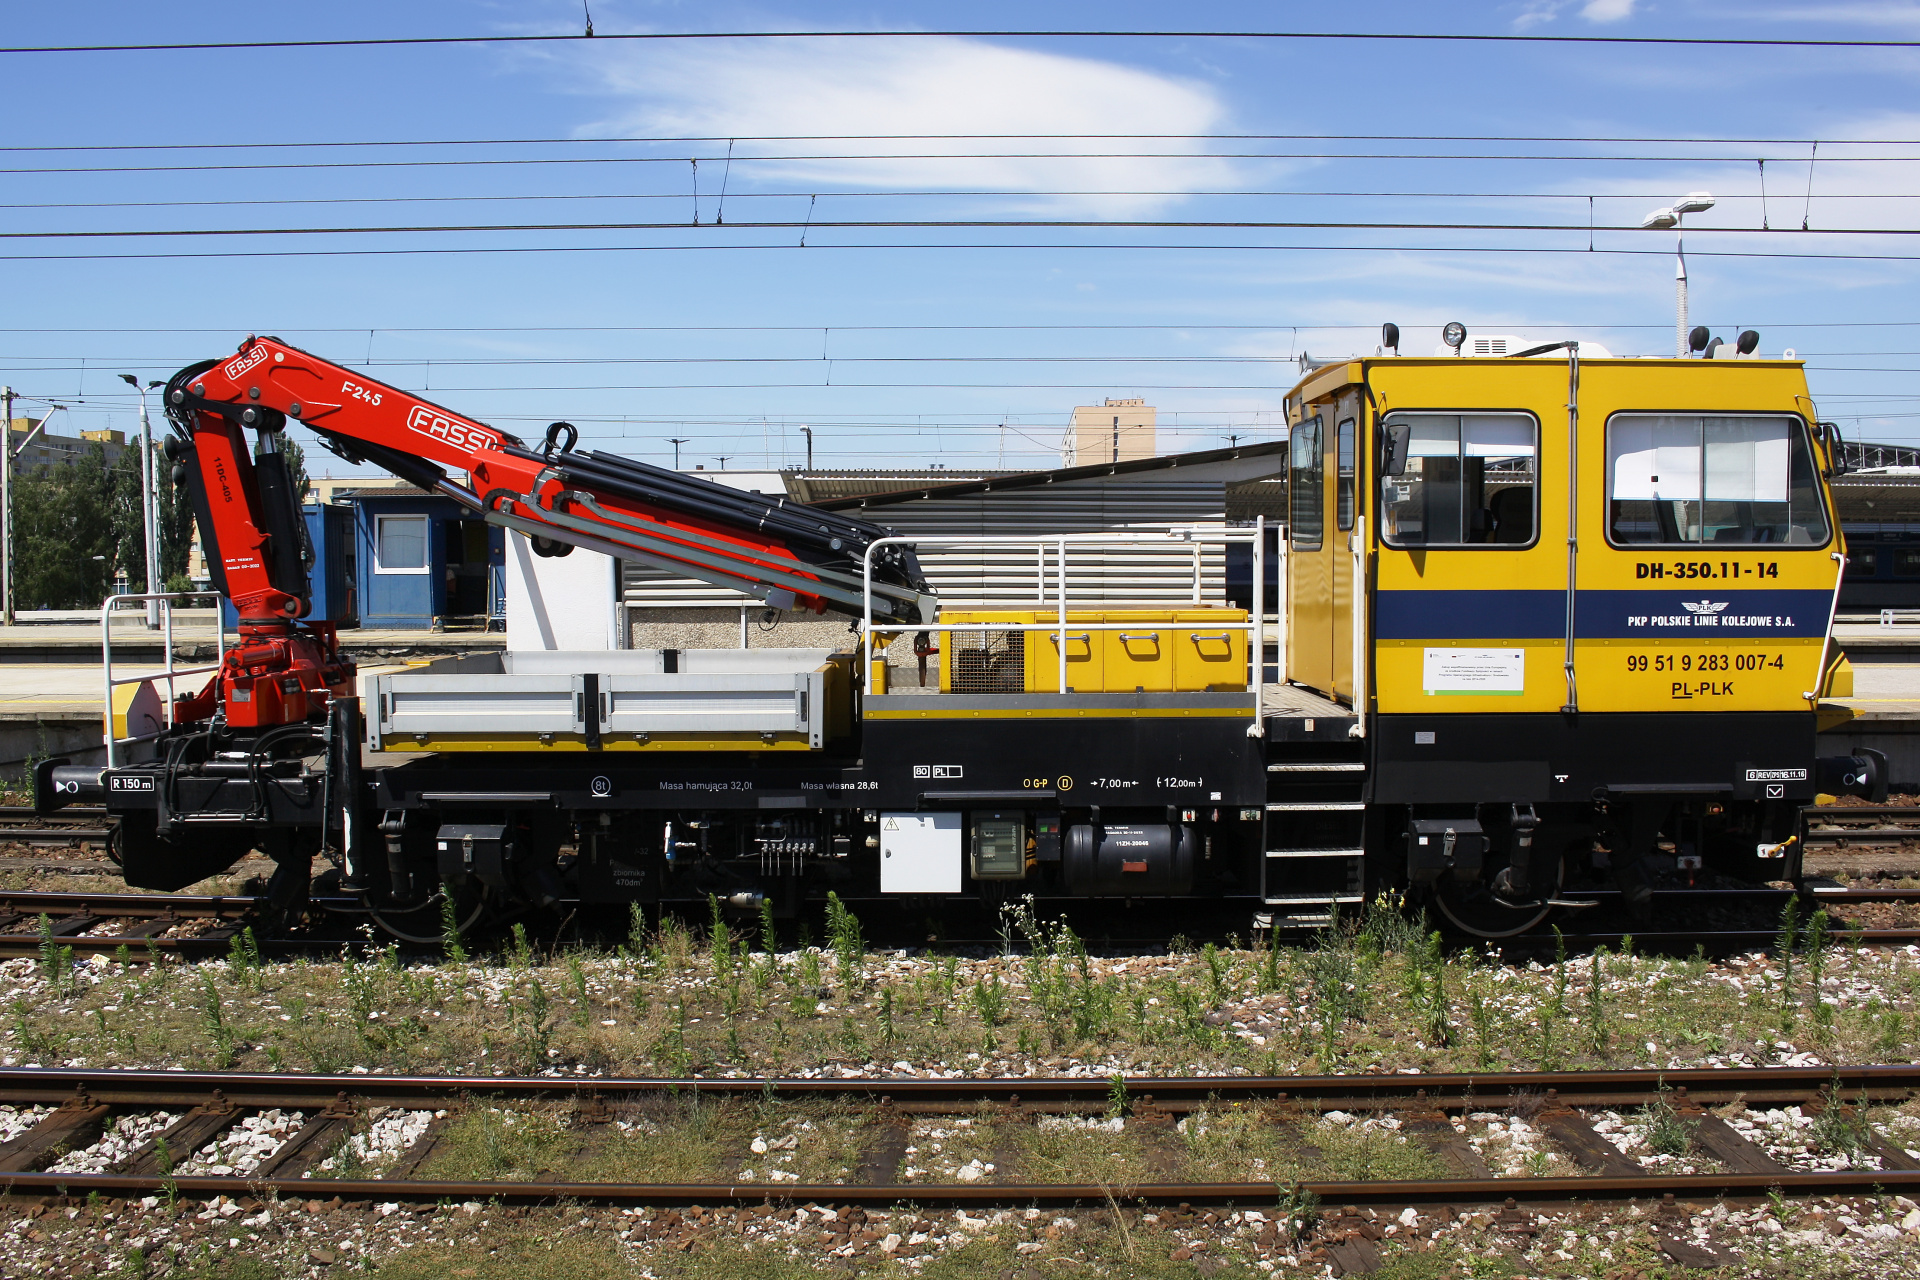 ZPS DH-350.11-14 (Vehicles » Trains and Locomotives » Maintenance)